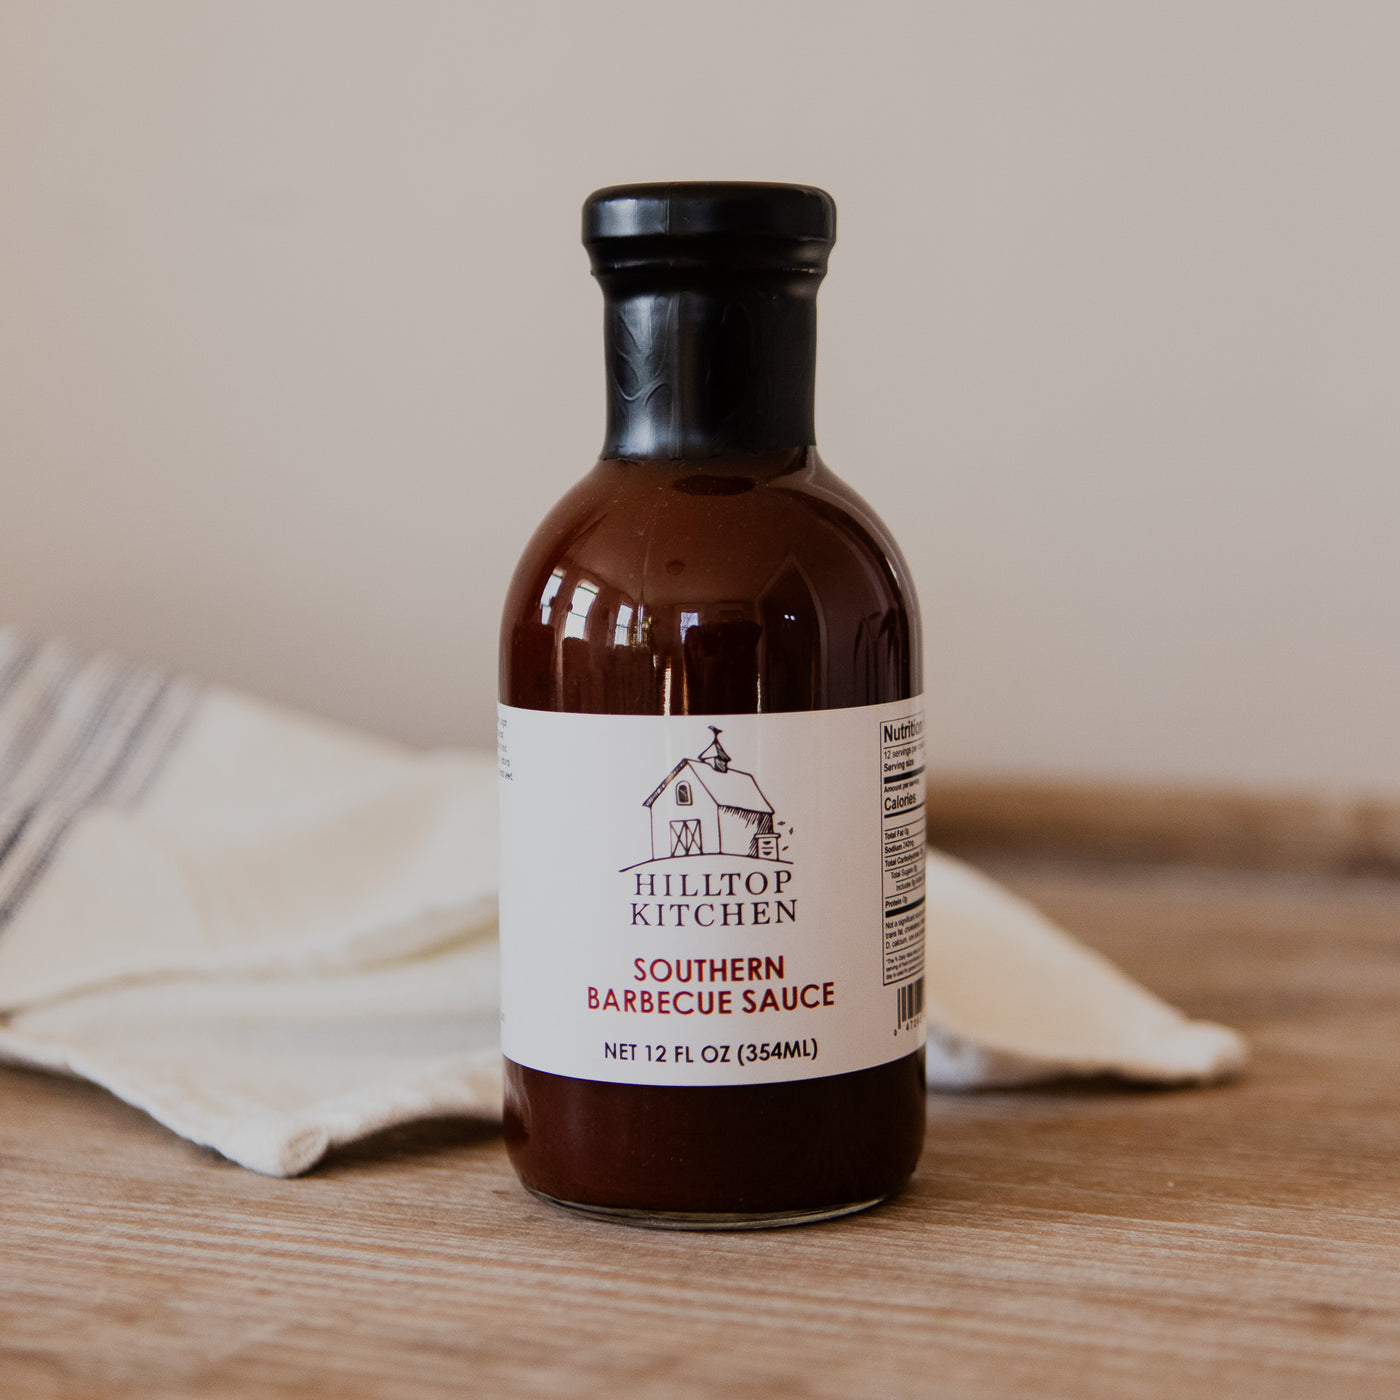 Southern Barbecue Sauce